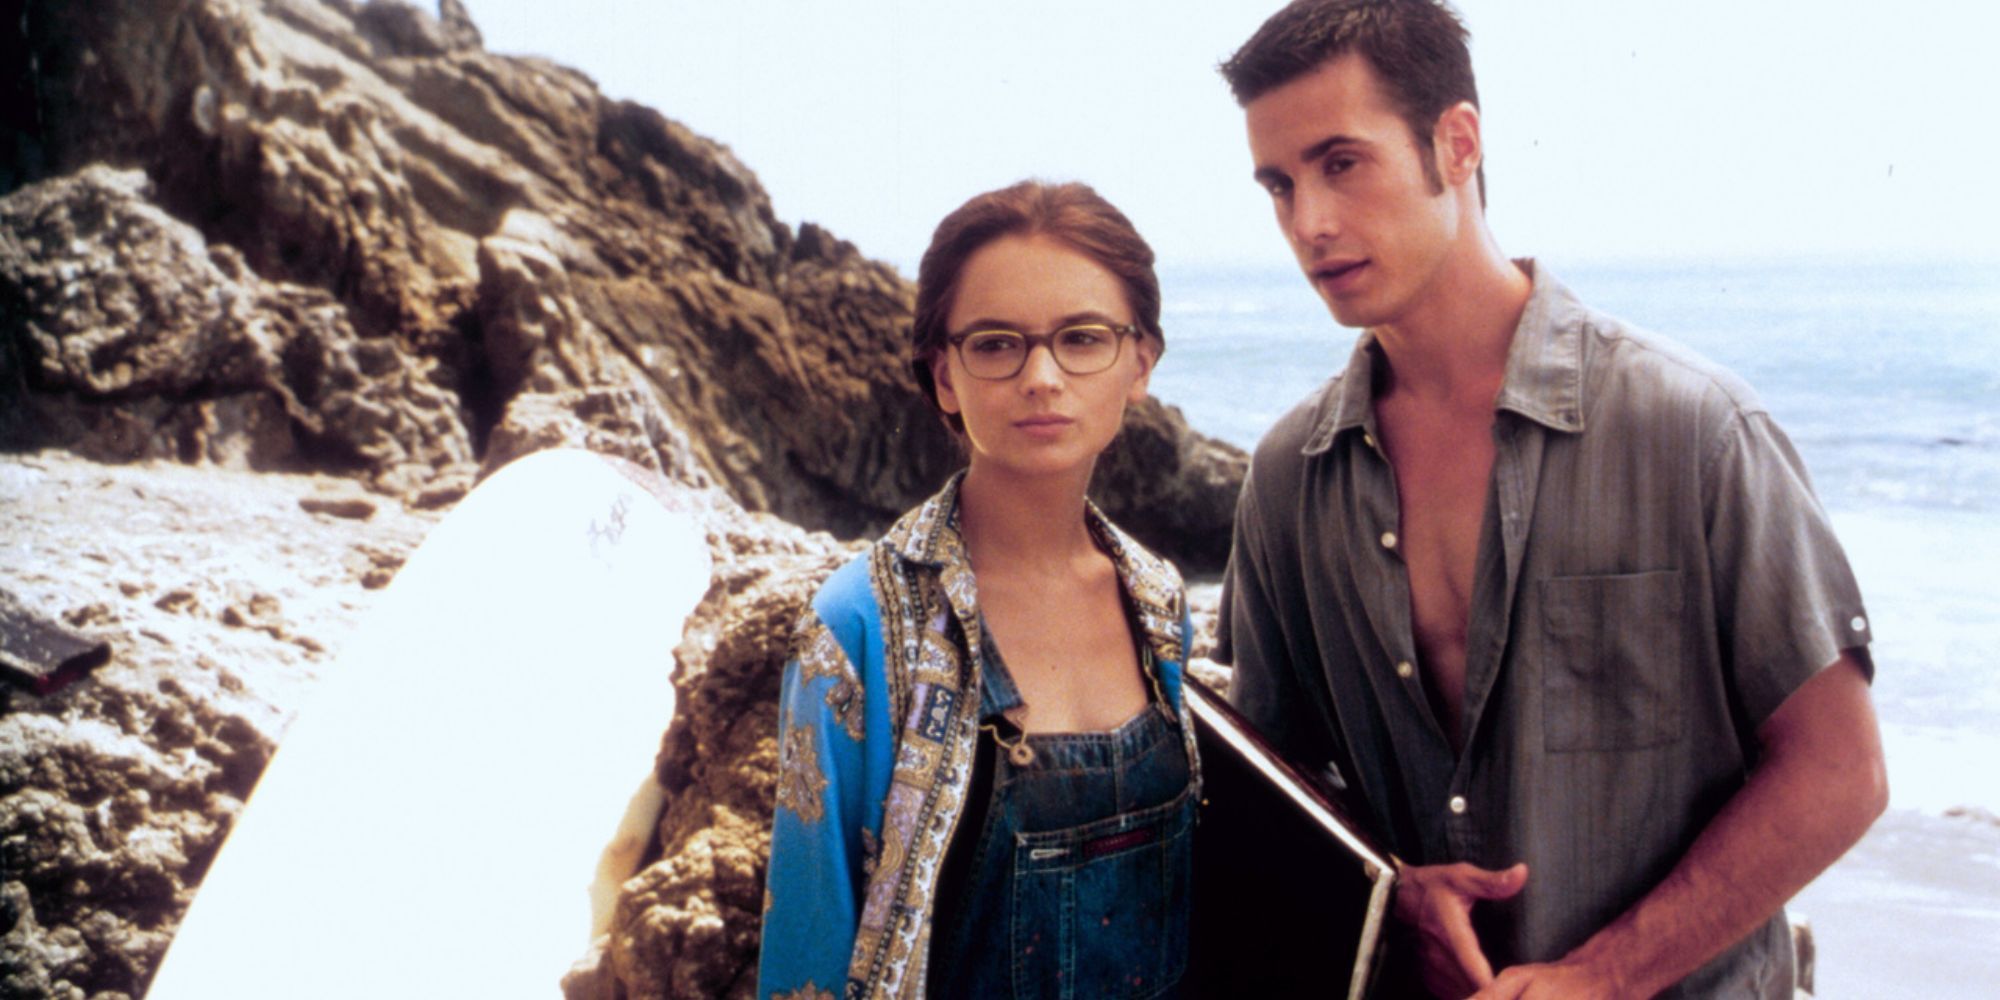 Zack and Laney at the beach in She's All That